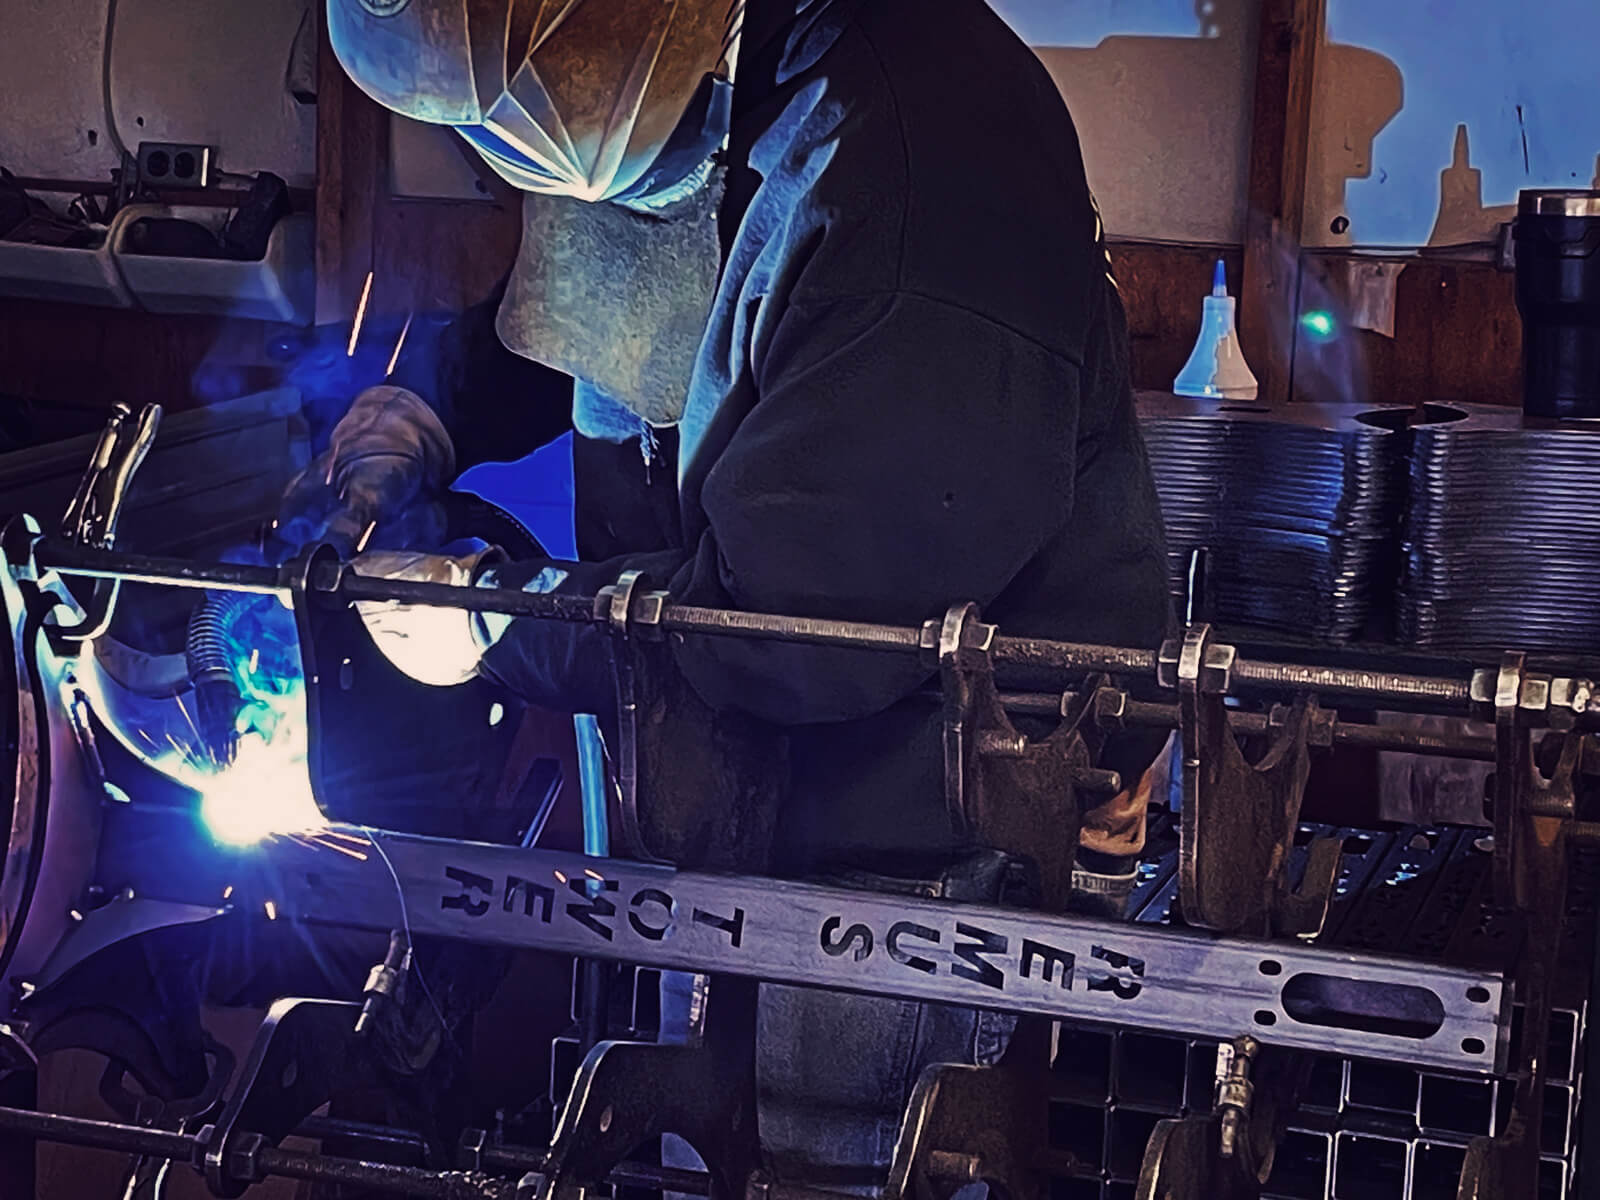 A welder welds on a Remus Tower beacon extension with the words Remus Tower cut out of the side.